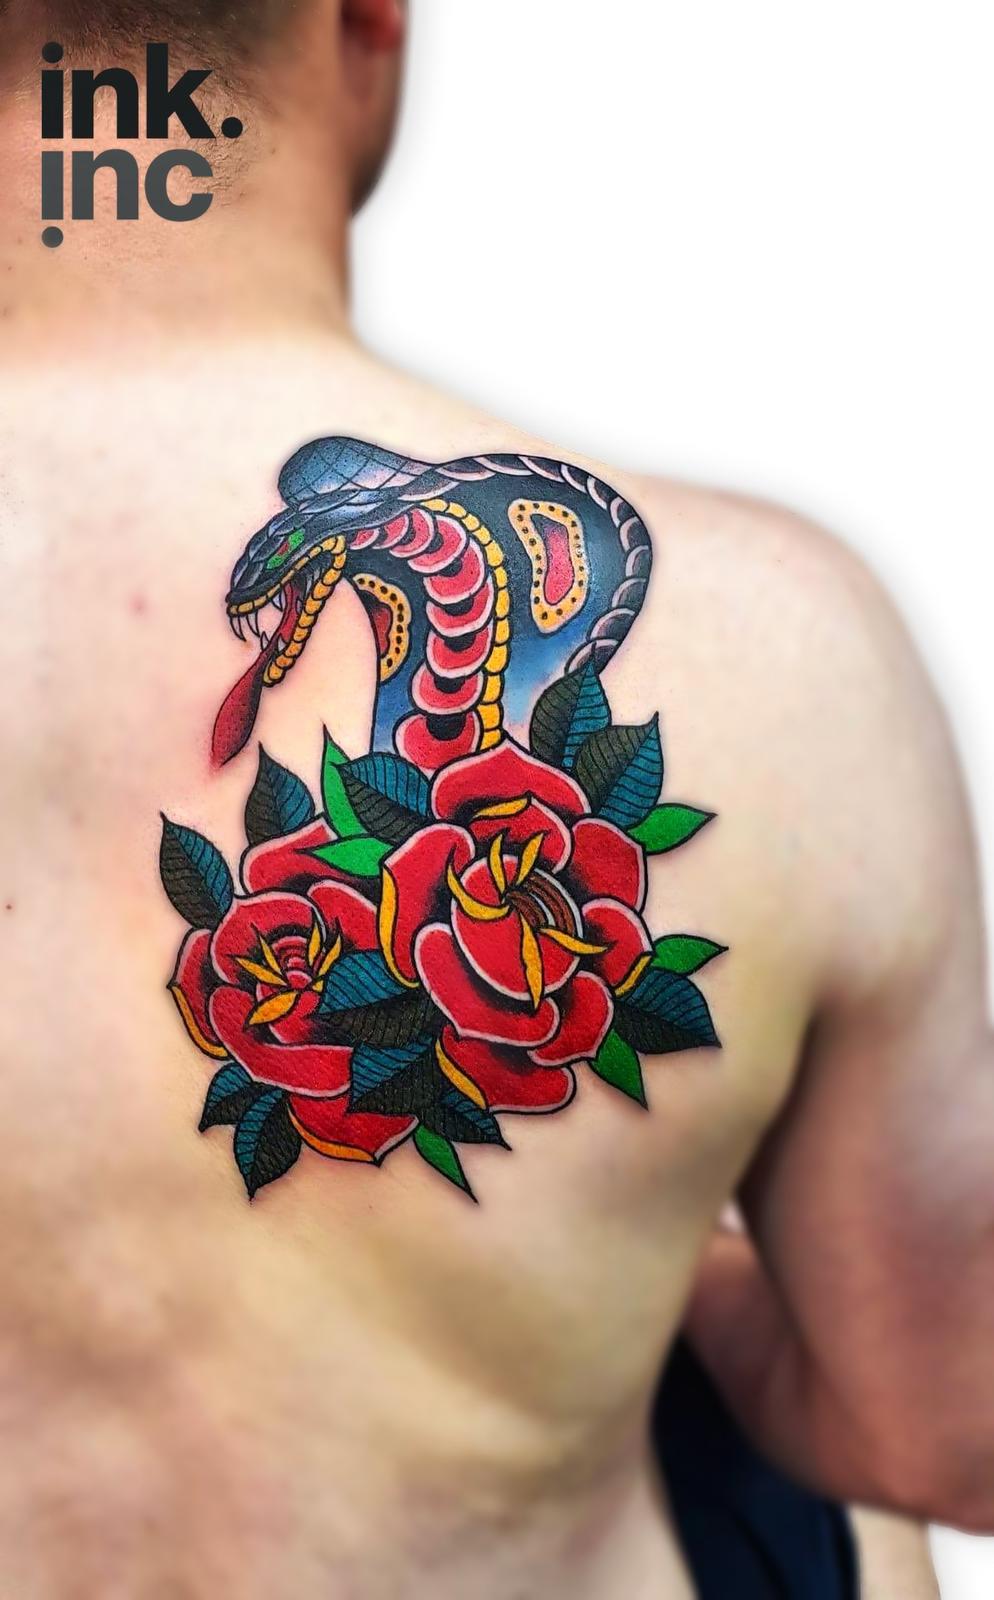 Embroidery Tattoos Are Both Complex And Beautiful